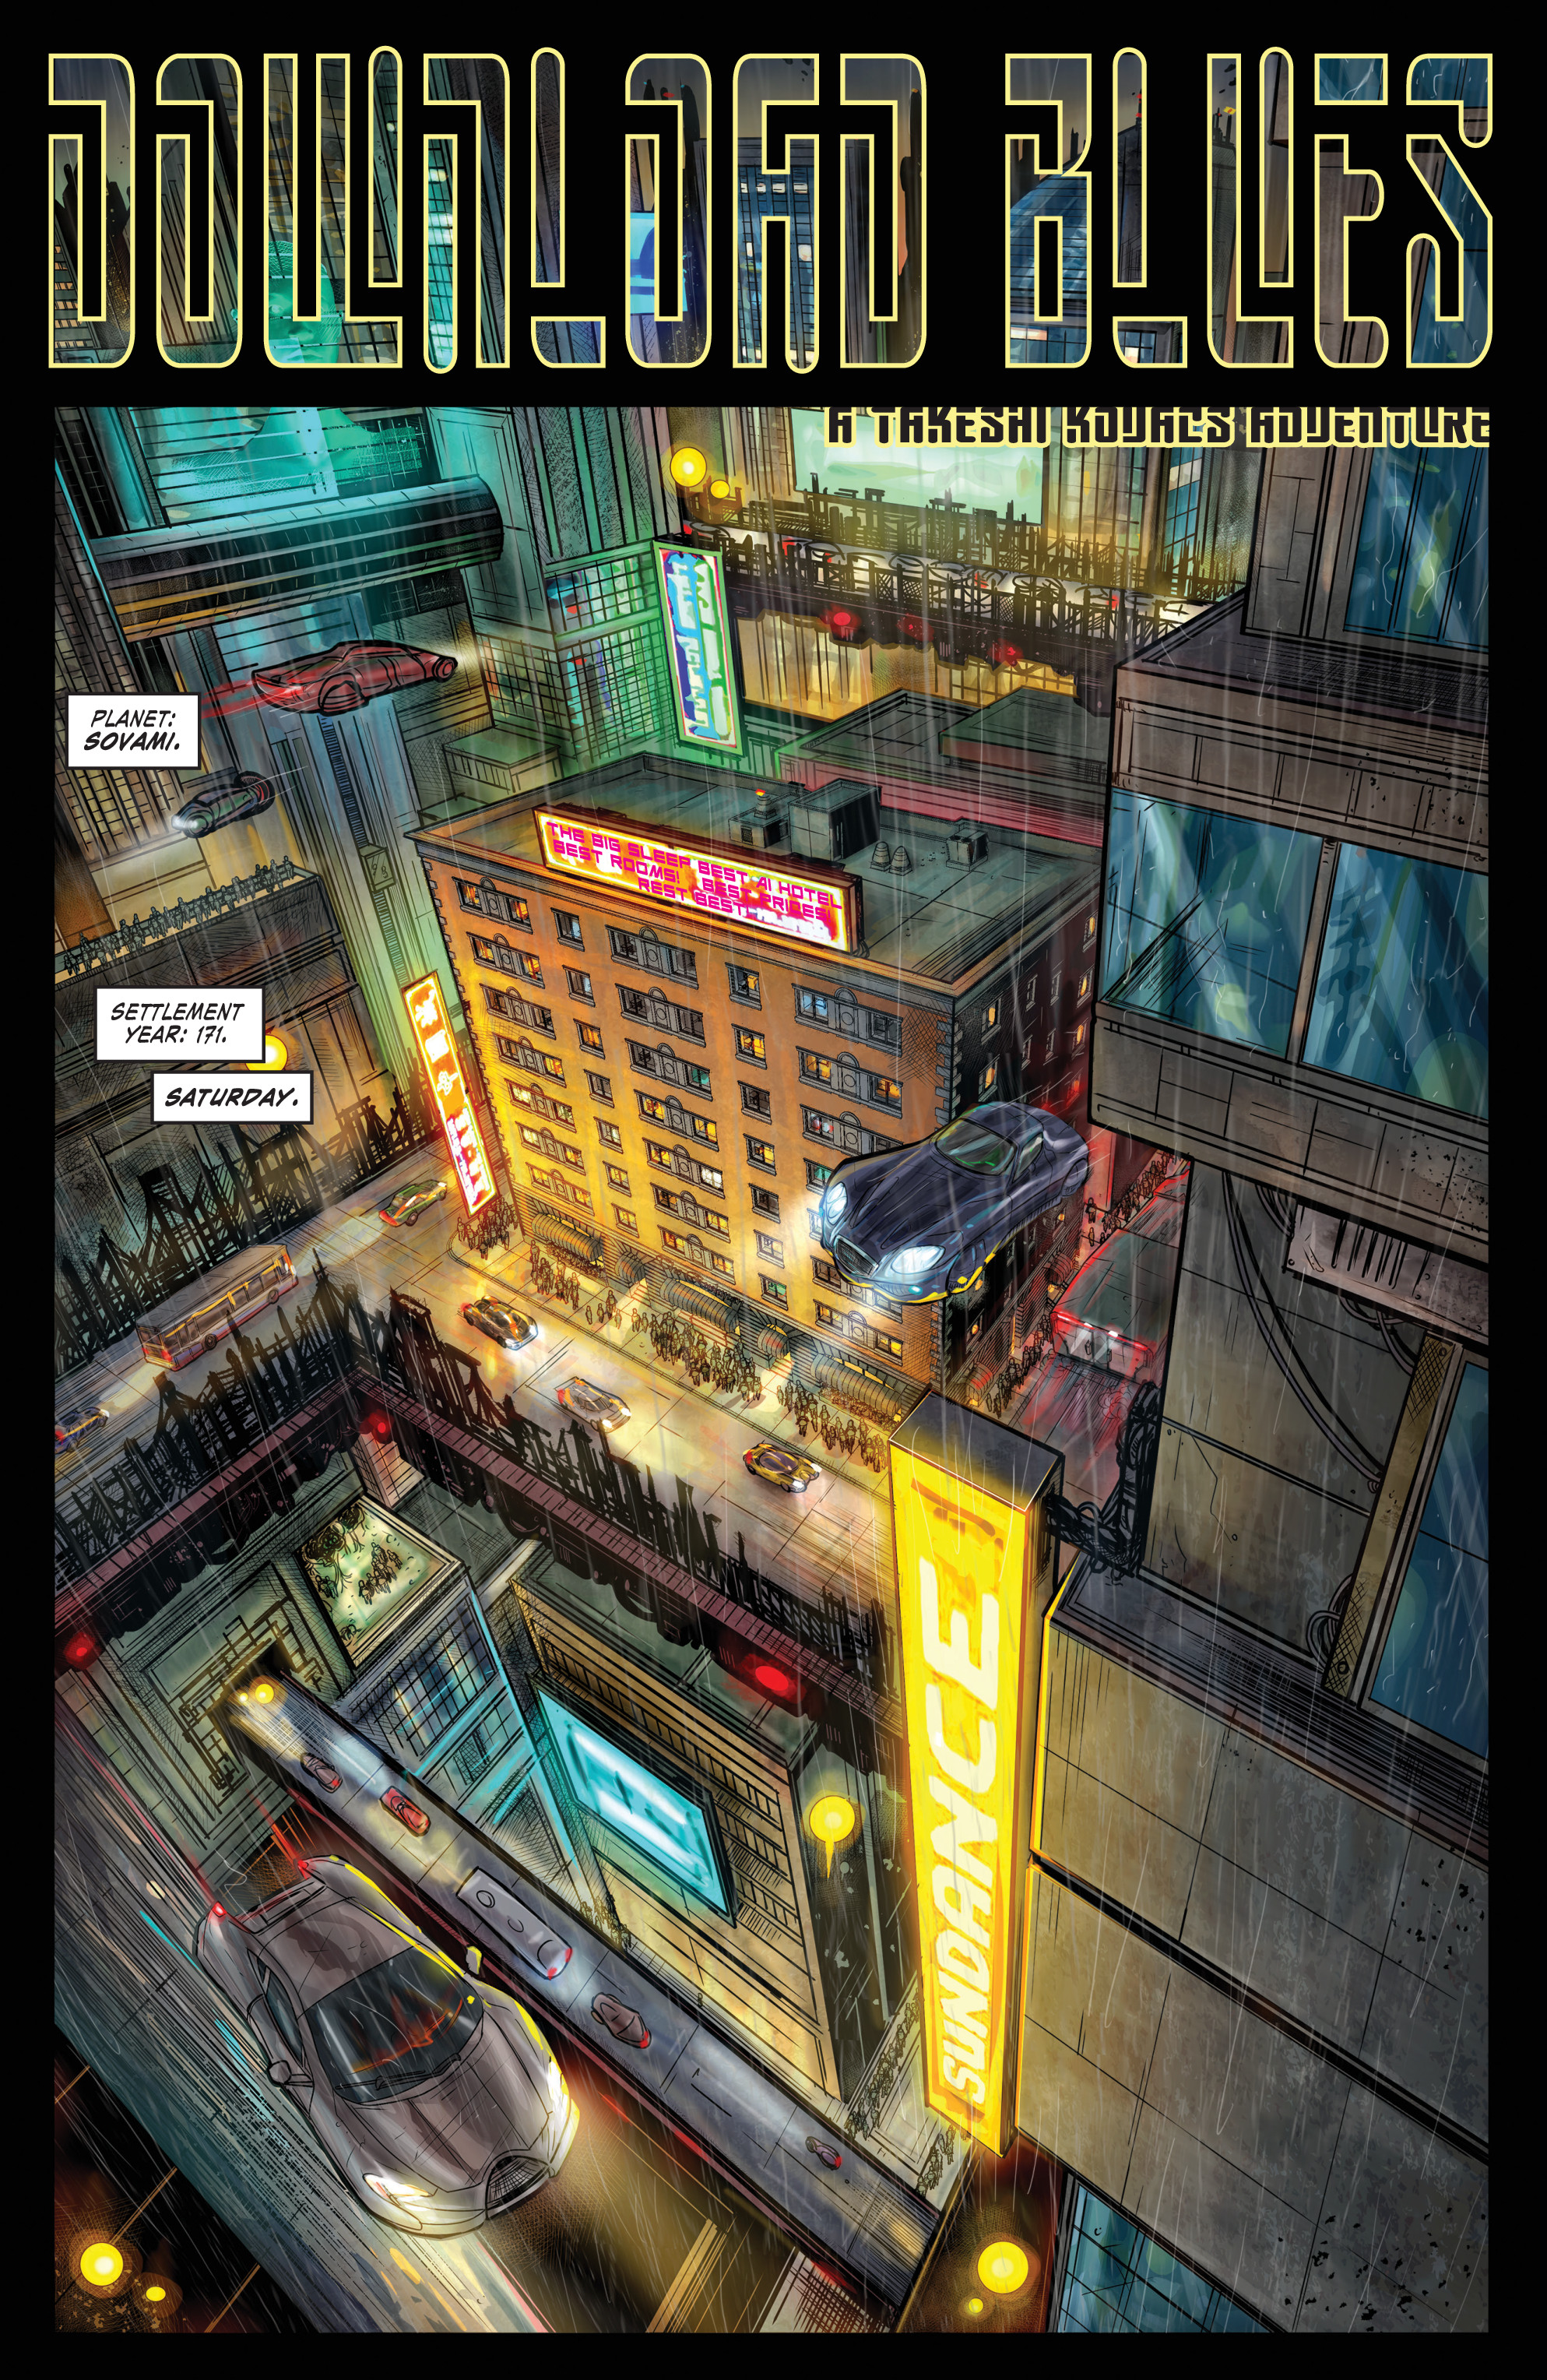 Read online Altered Carbon: Download Blues comic -  Issue # TPB - 9